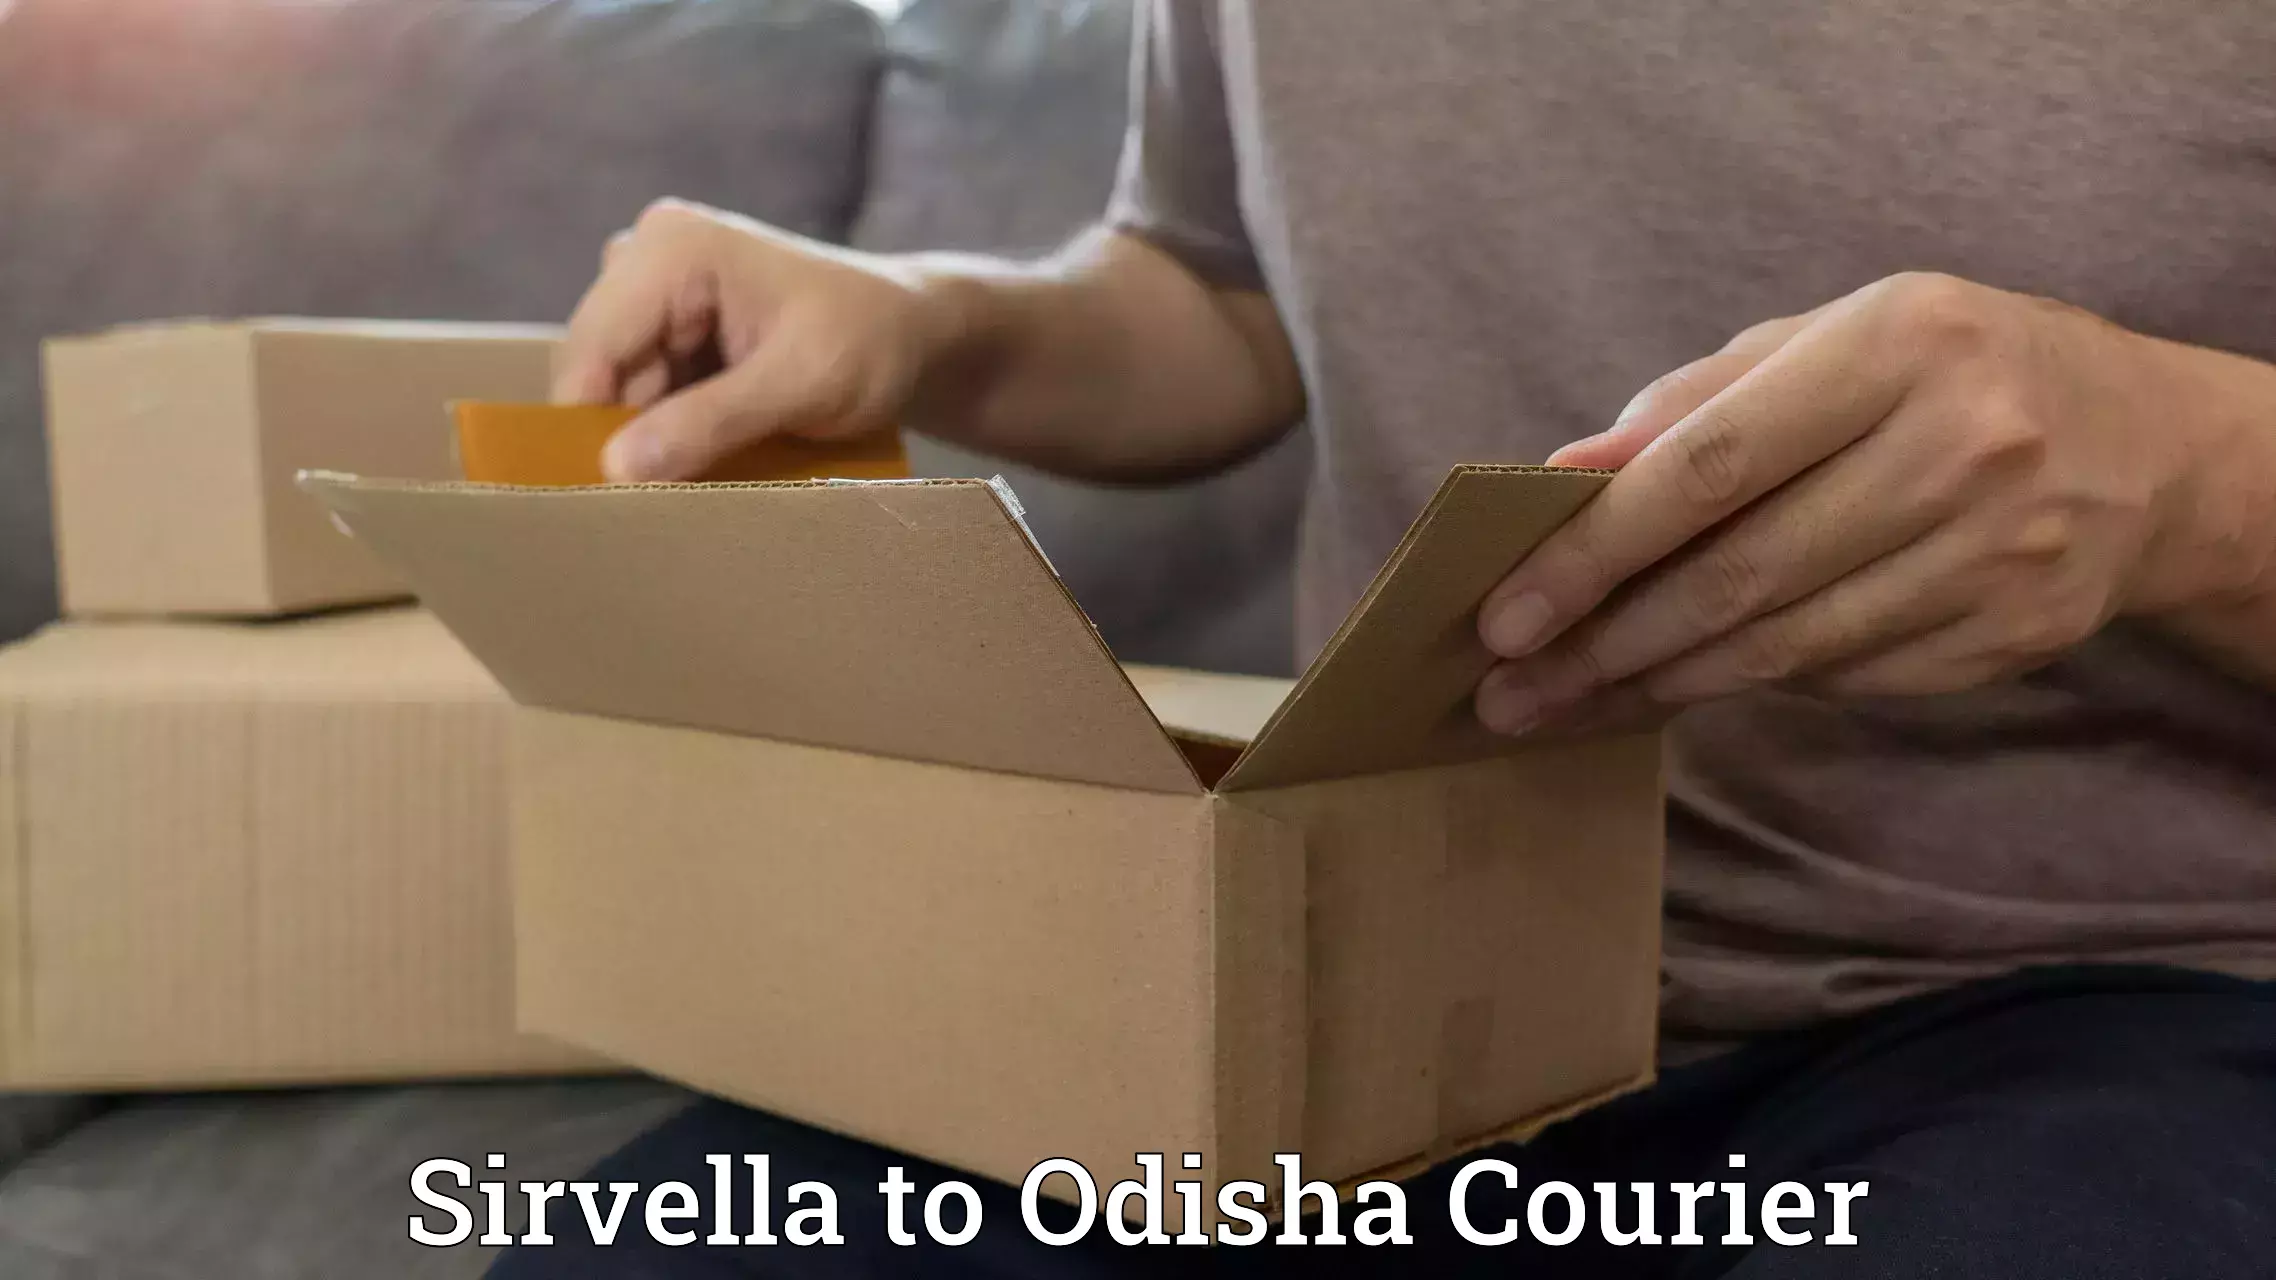 Courier service innovation in Sirvella to Sukinda